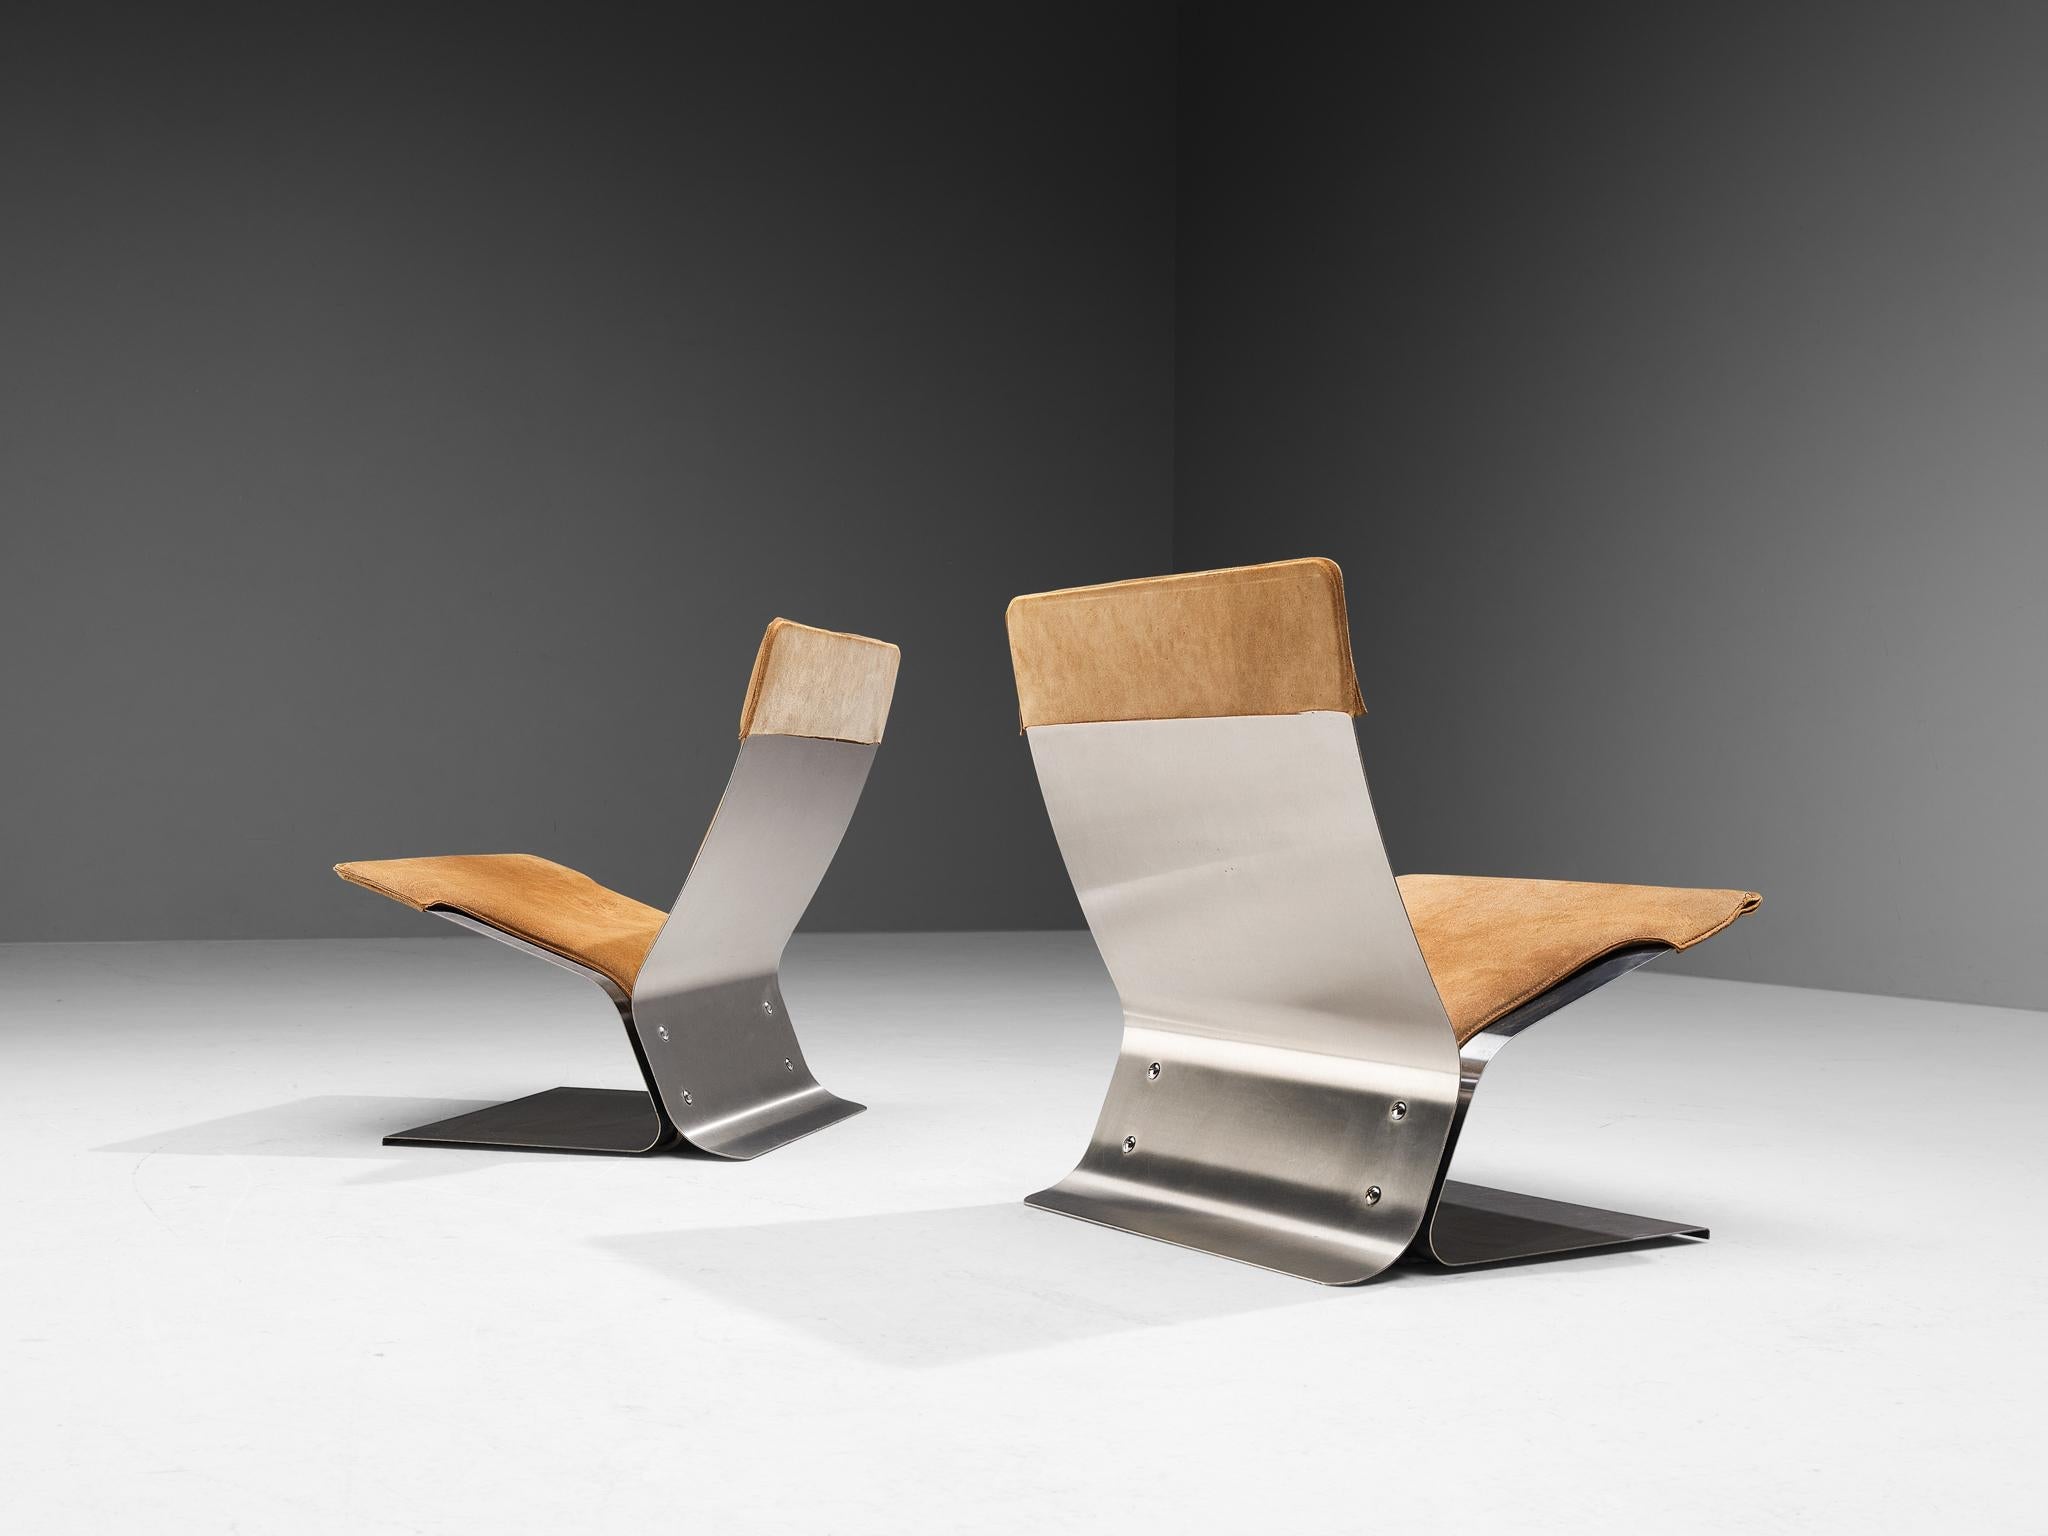 Pierre Folie for Jacques Charpentier 'Chauffeuse' Pair of Lounge Chairs